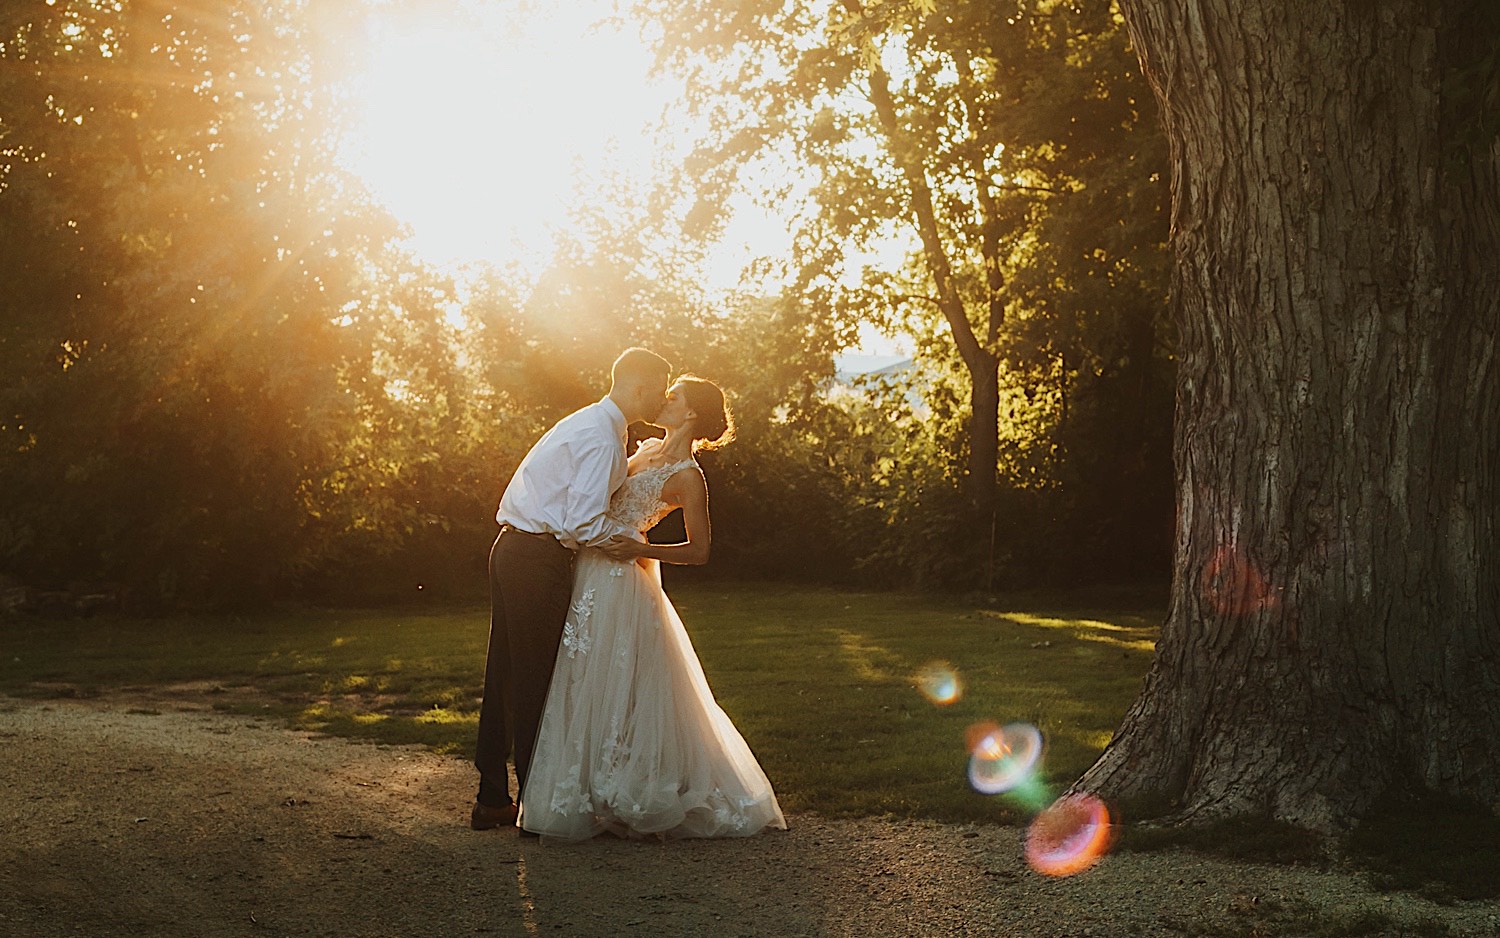 A bride and groom kiss one another in front of trees and bushes during sunset outside of their wedding venue Legacy Hill Farms